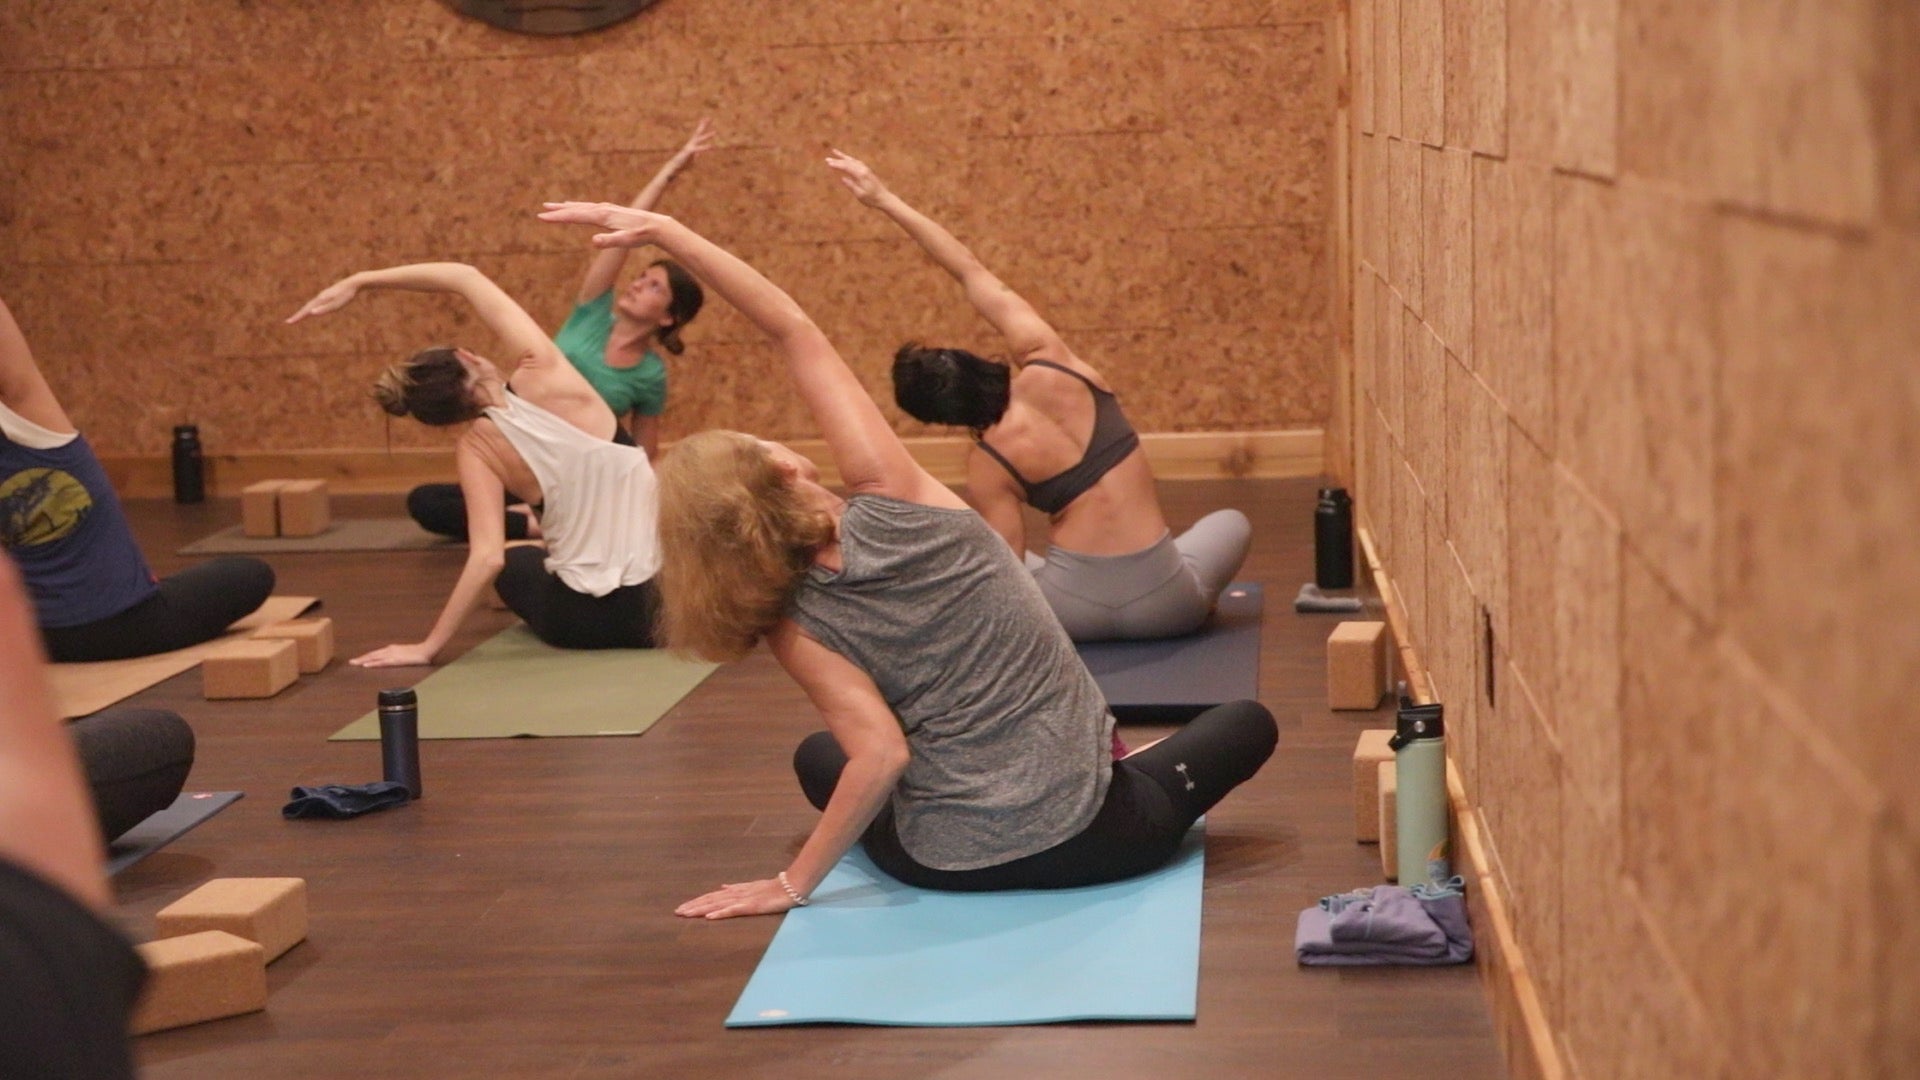 Welcome to The Yoga Factory by Yoloha on Vimeo